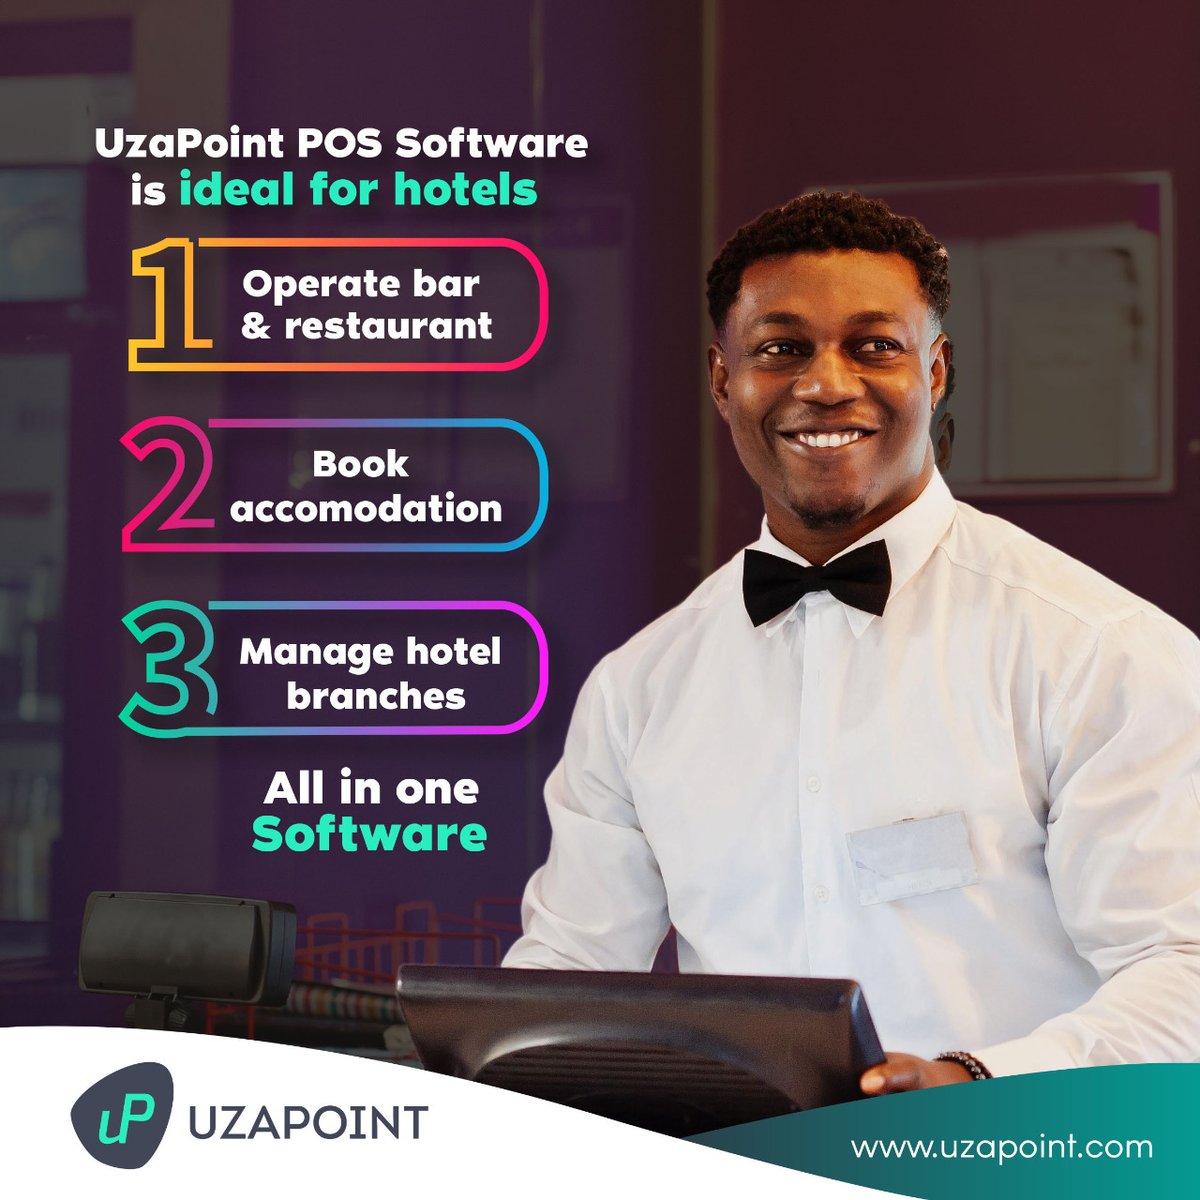 Streamline your hotel operations using Uzapoint and manage it more effectively.

Call/WhatsApp us today and schedule for a demo : 0704502414

#uzapoint #POS #possystem #posinkenya #possolution #software #technology #business #hotelmanagementsystem #restaurantsoftware #hotel